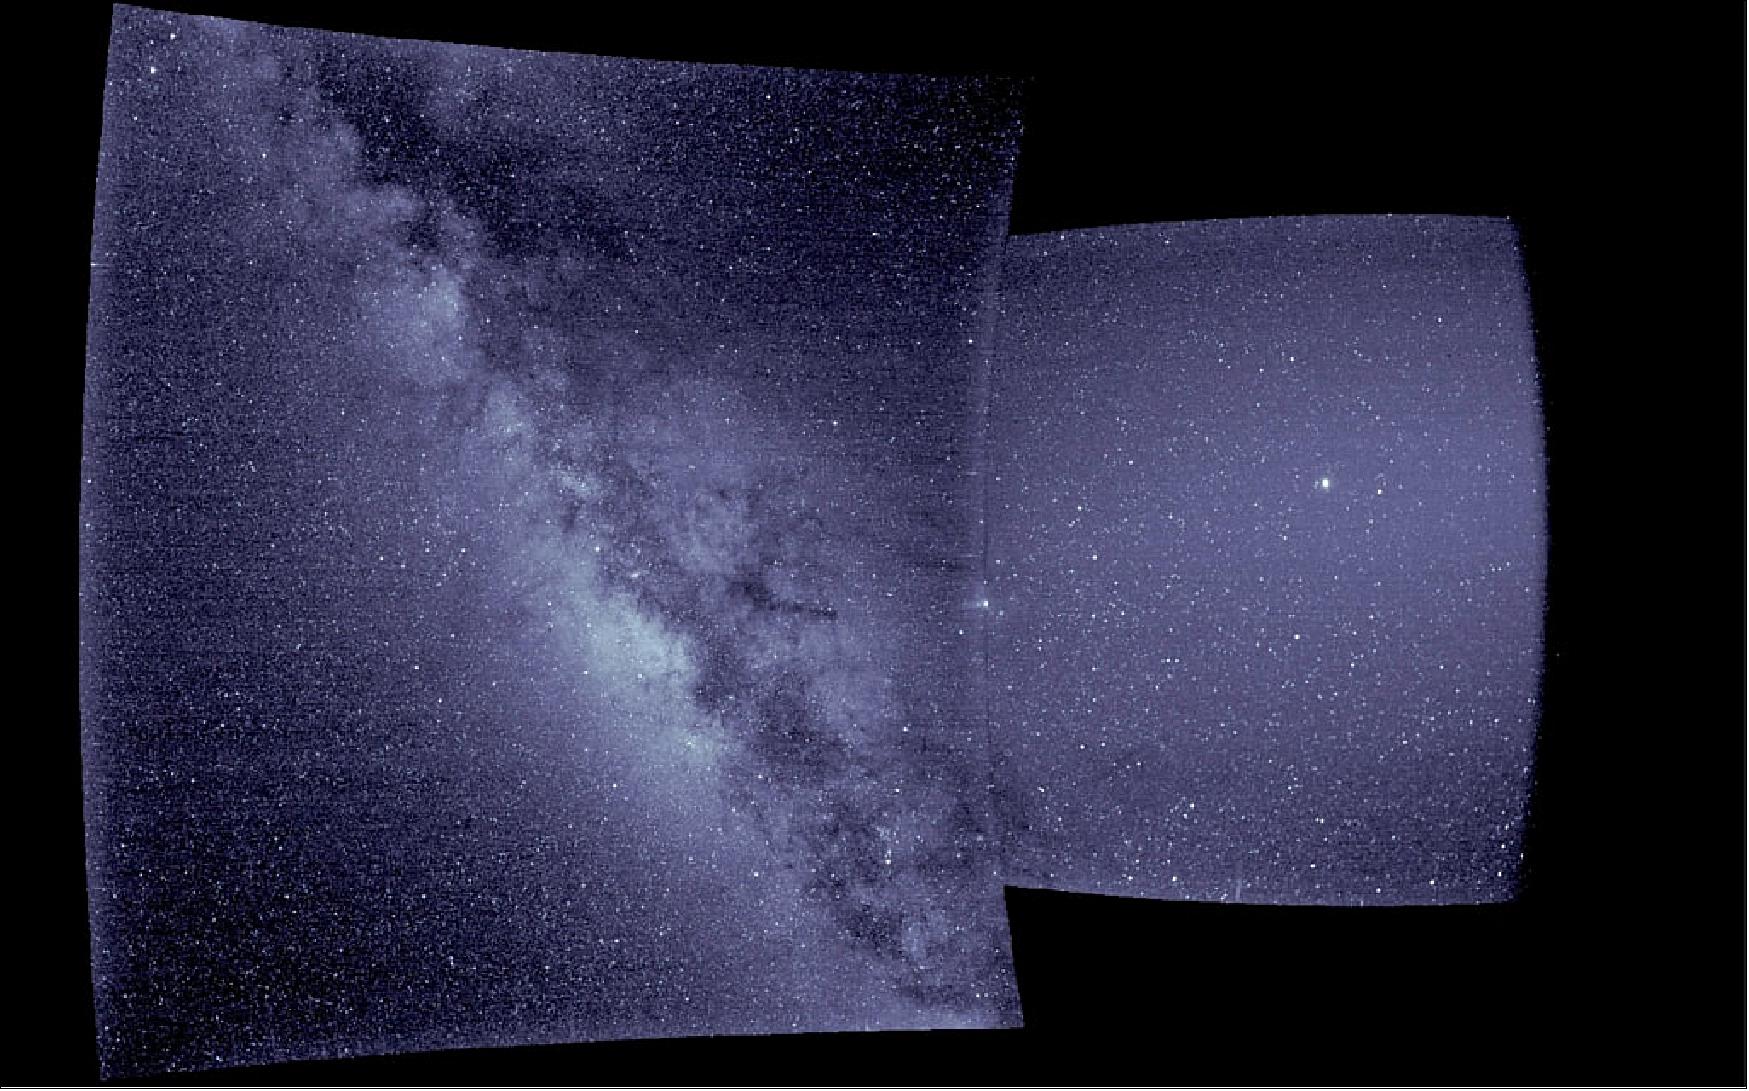 Figure 18: First light data from Parker Solar Probe's WISPR (Wide-field Imager for Solar Probe) instrument suite. The right side of this image — from WISPR's inner telescope — has a 40º FOV, with its right edge 58.5º from the Sun's center. The bright object slightly to the right of the image's center is Jupiter. - The left side of the image is from WISPR’s outer telescope, which has a 58º FOV and extends to about 160º from the Sun. It shows the Milky Way, looking at the galactic center. There is a parallax of about 13º in the apparent position of the Sun as viewed from Earth and from Parker Solar Probe (image credit: NASA/Naval Research Laboratory/Parker Solar Probe)